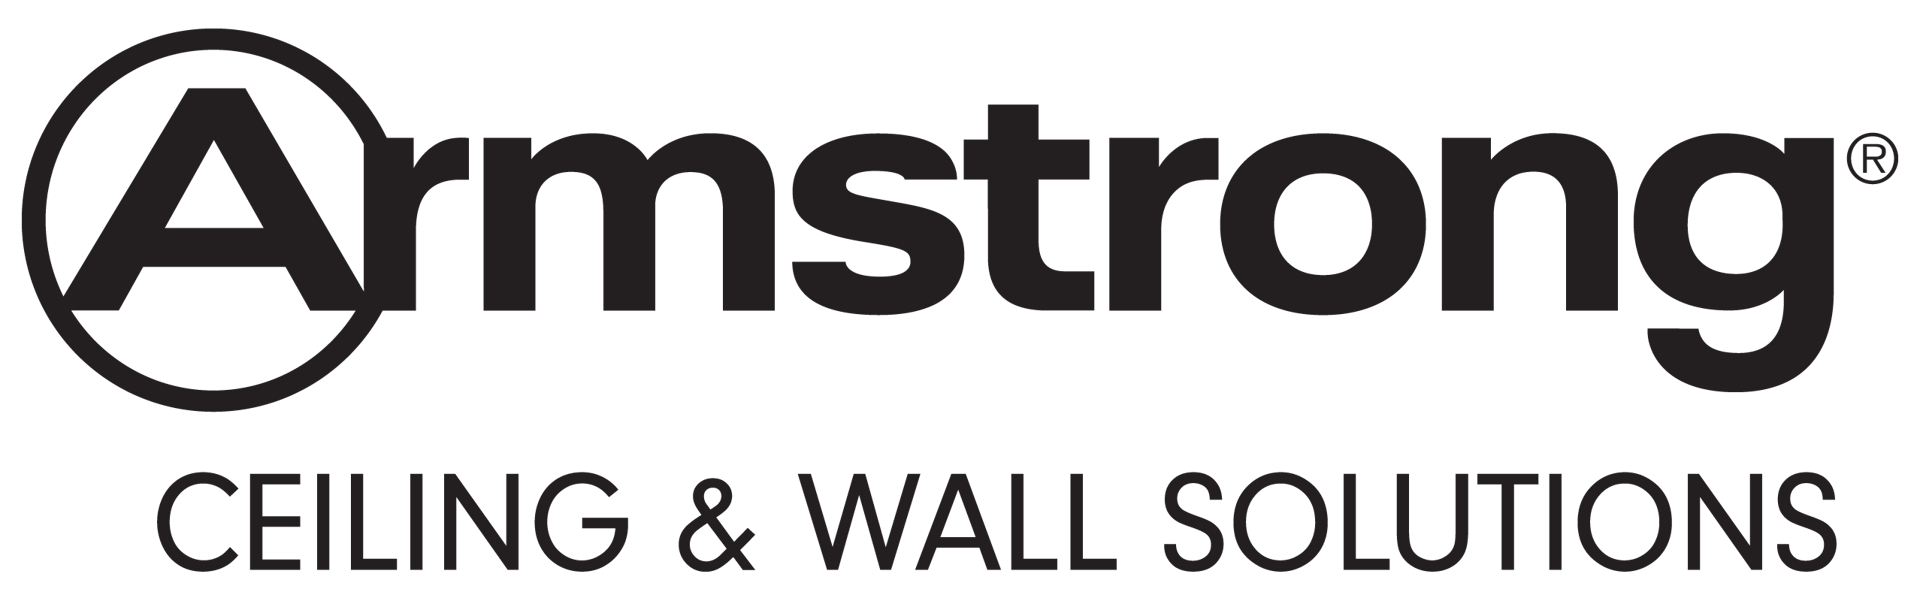 Armstrong Ceiling  Wall Solutions